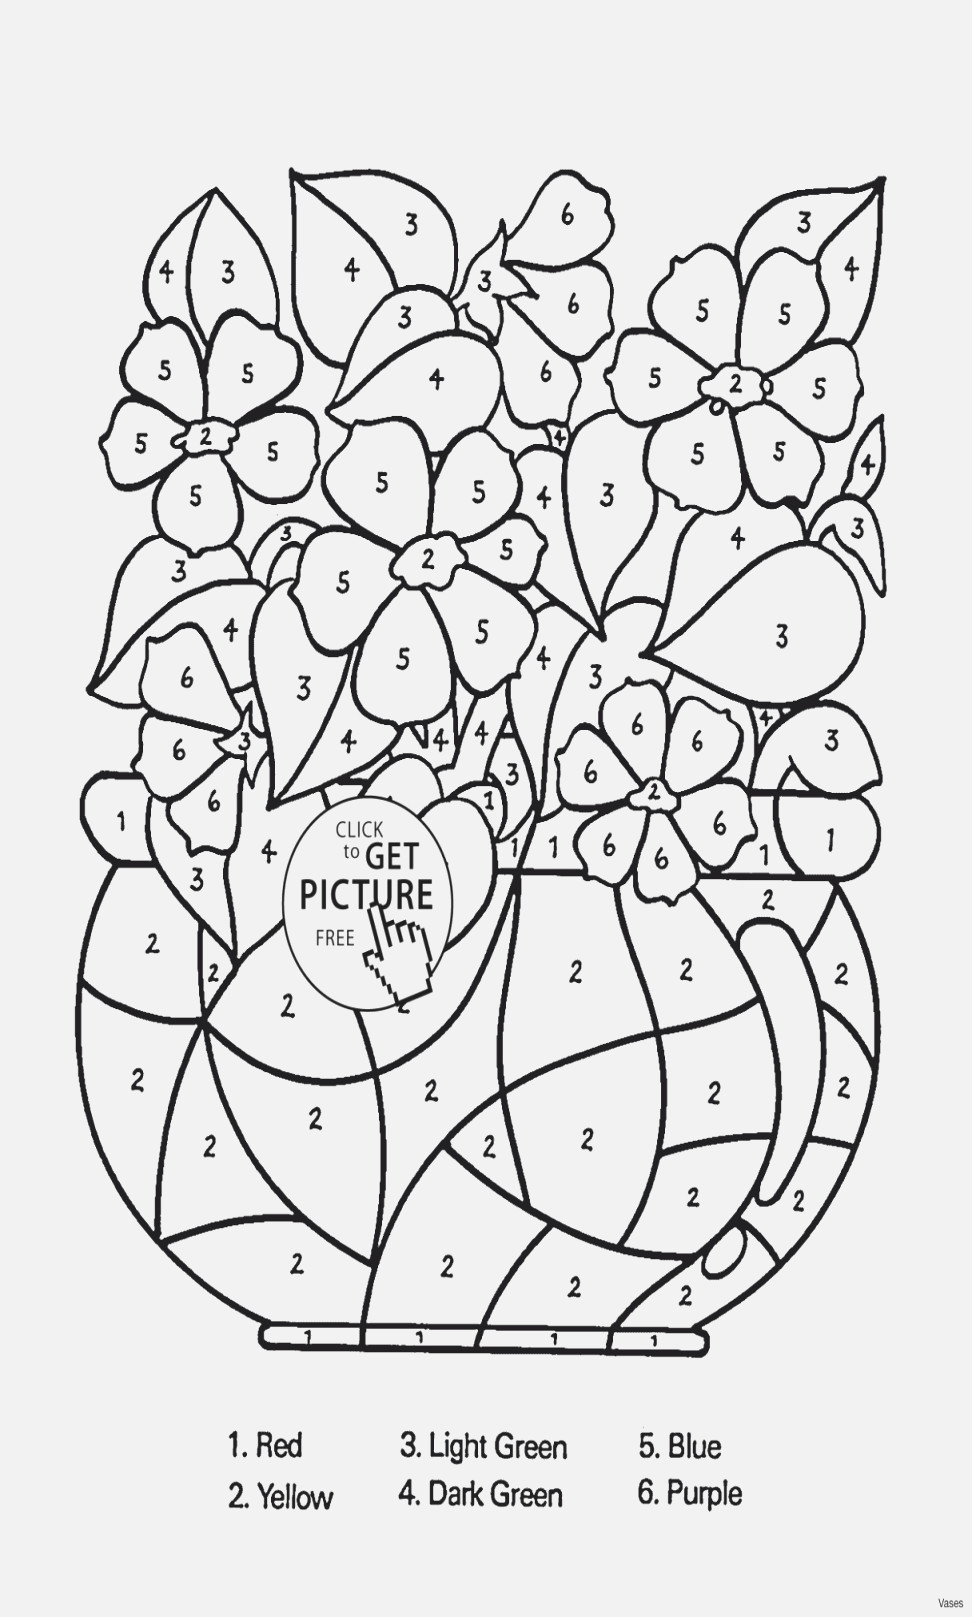 28 Lovable Red Flower Vase 2024 free download red flower vase of easy coloring pictures vases flower vase coloring page pages flowers throughout easy coloring pictures vases flower vase coloring page pages flowers in a top i 0d and free